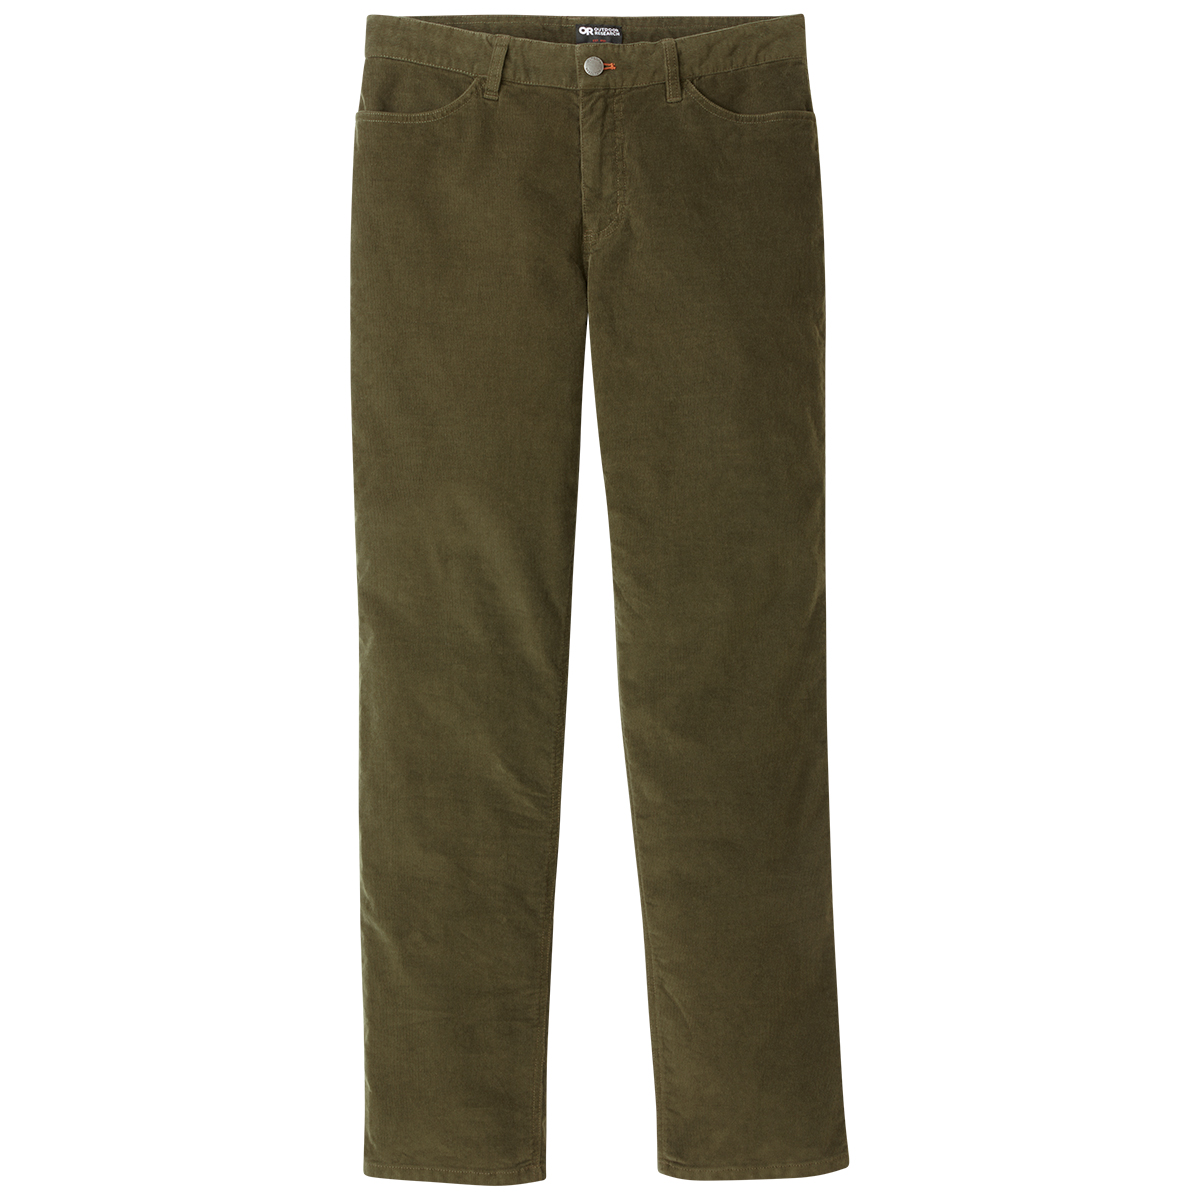 High-quality authentic OUTDOOR RESEARCH Men's Method 32 Cord Pants  Wholesale at affordable prices